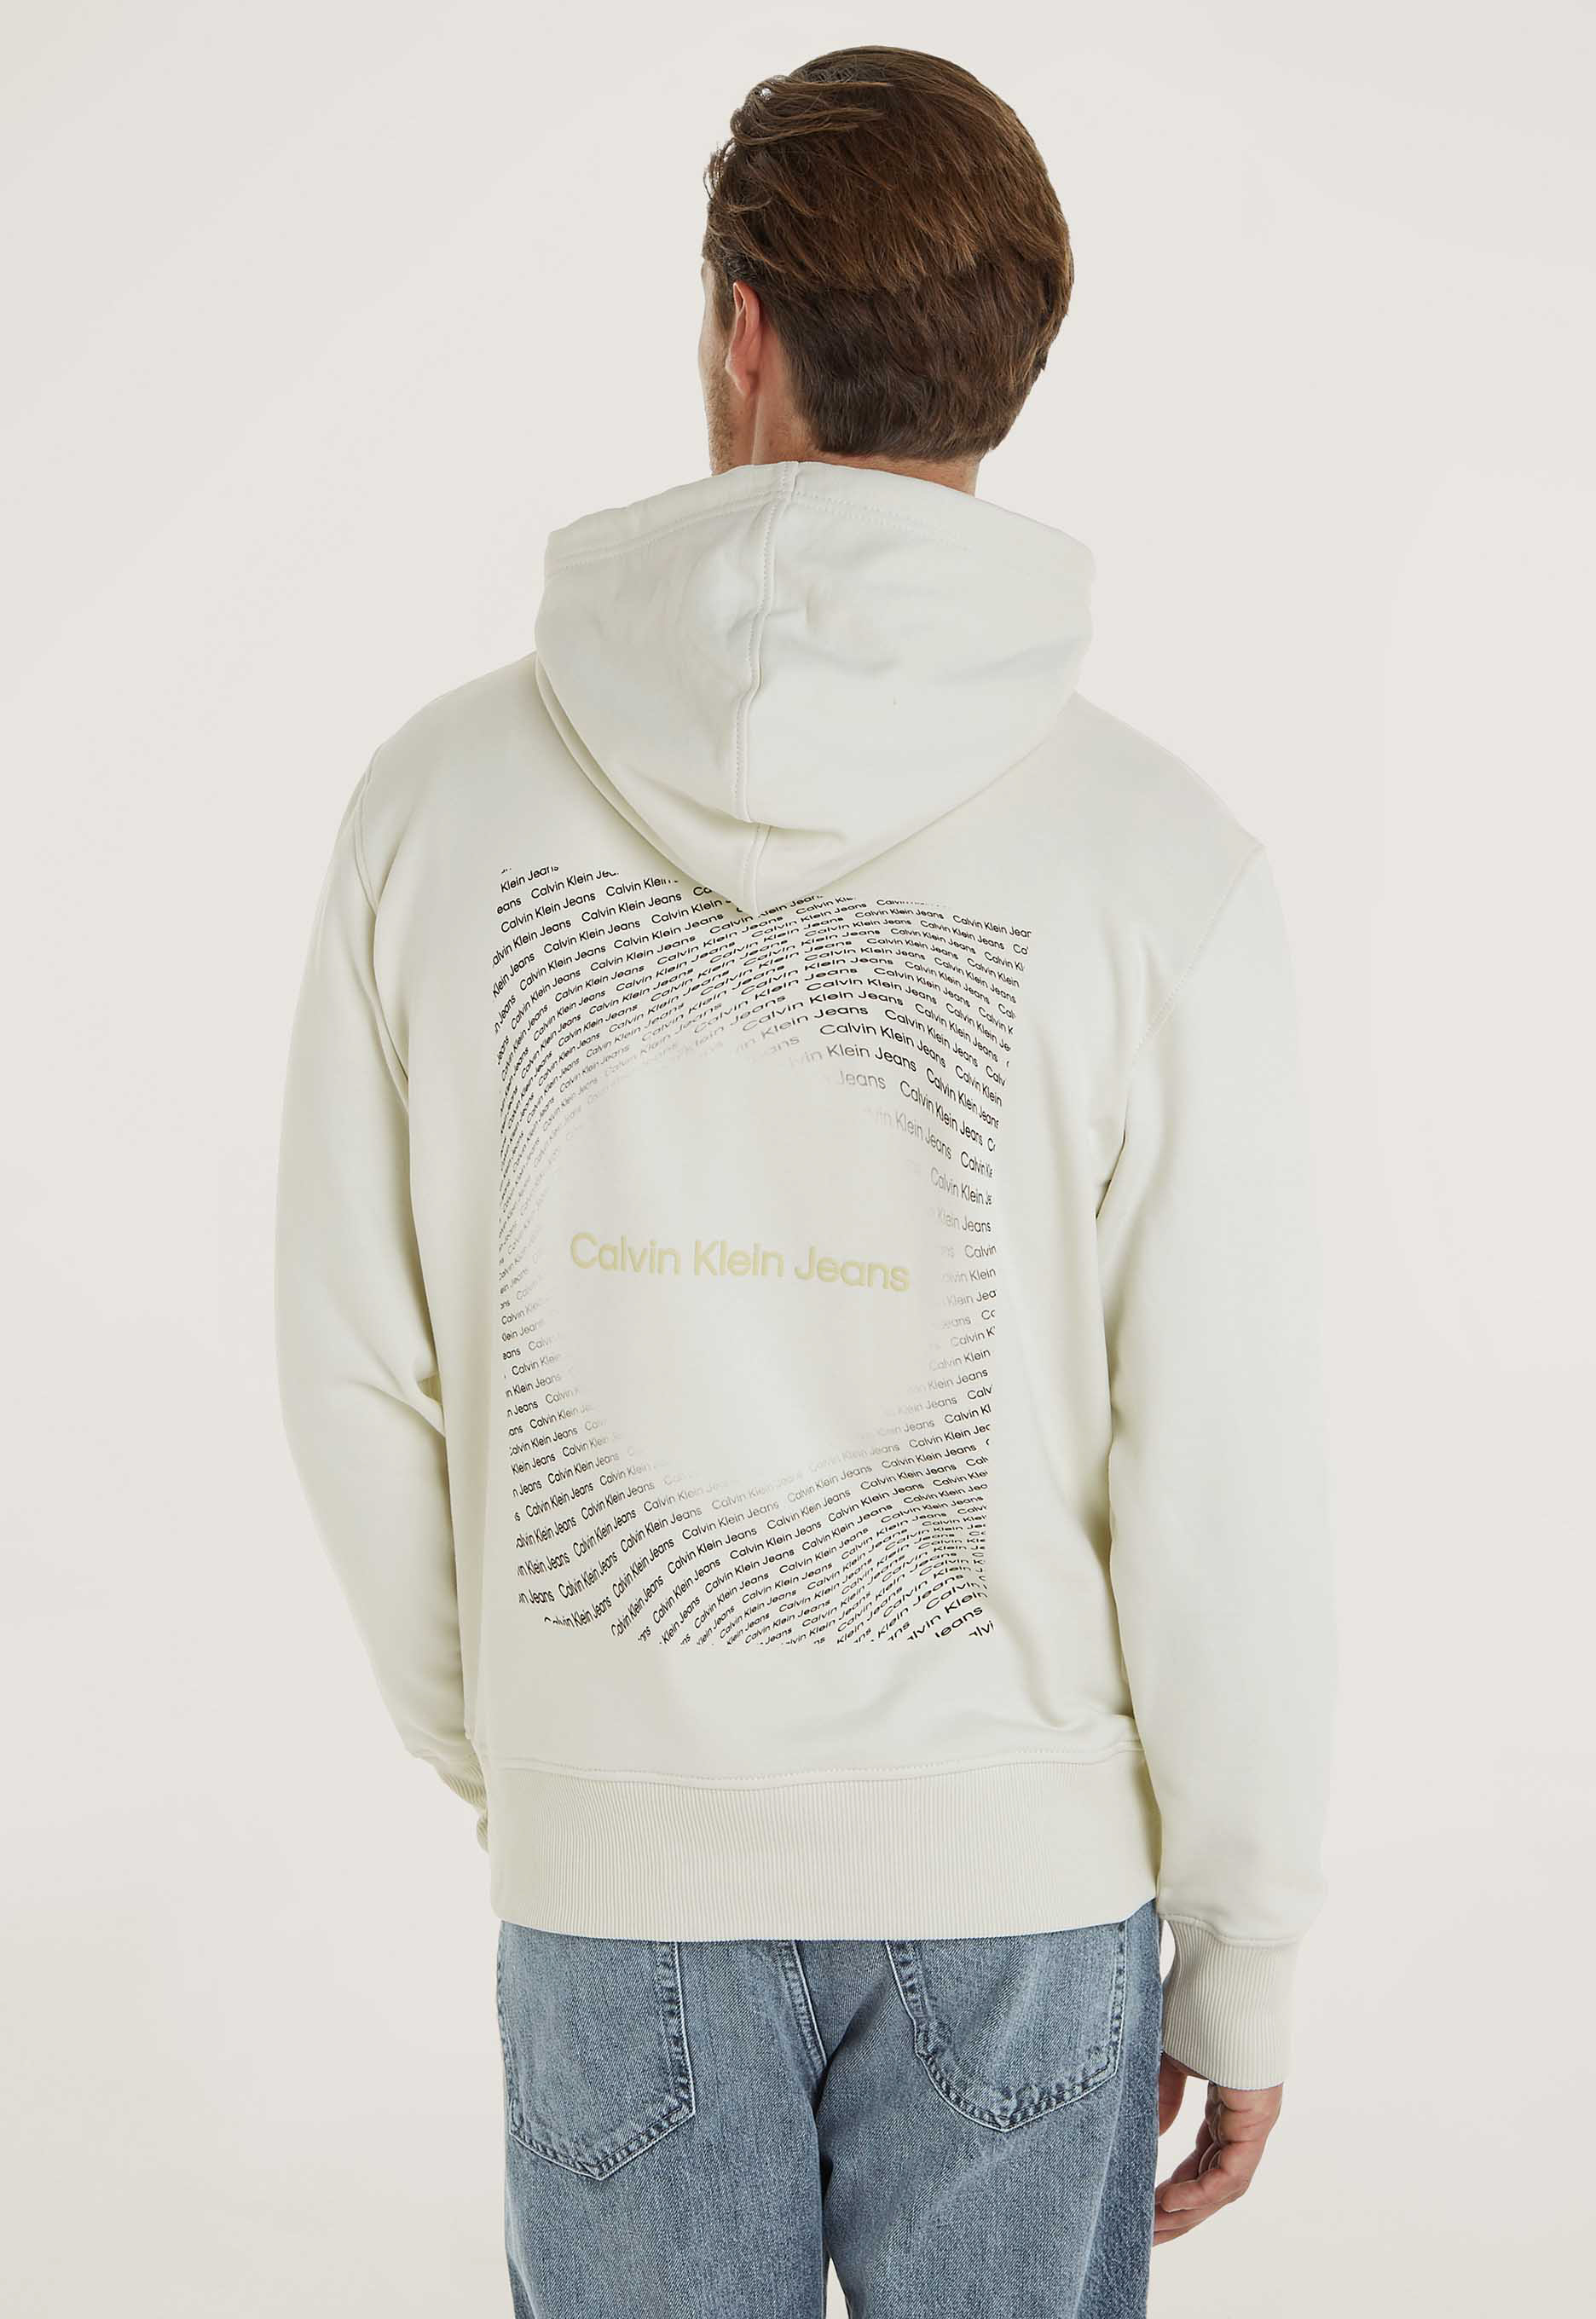 Calvin klein Square Frequency Logo Hoodie